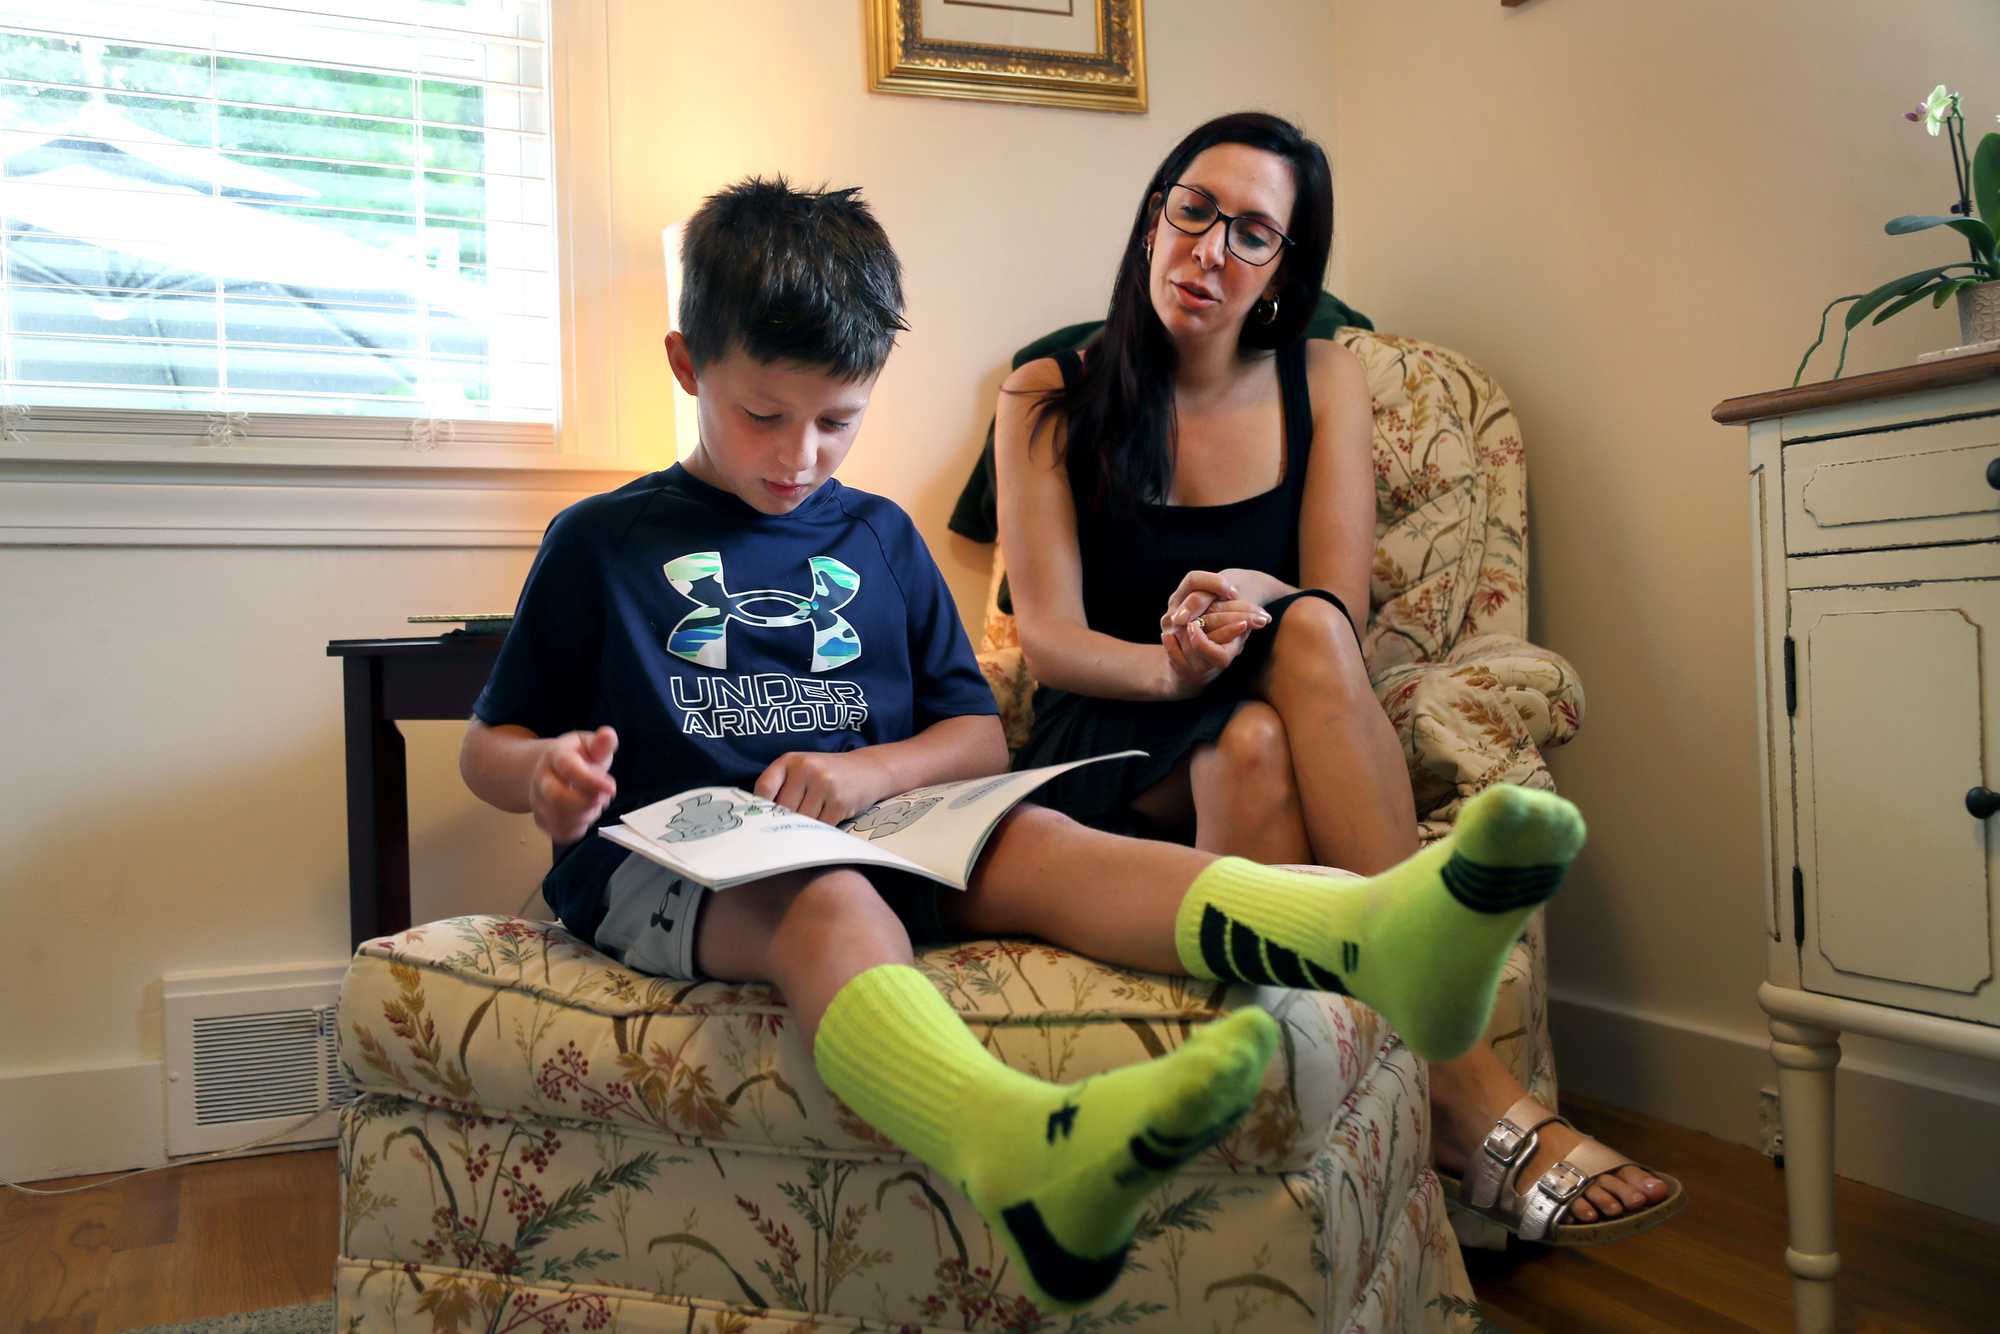 Carmine Coy, 7, read a book at home in Reading as his mother, Lauren Andreottola, listened.